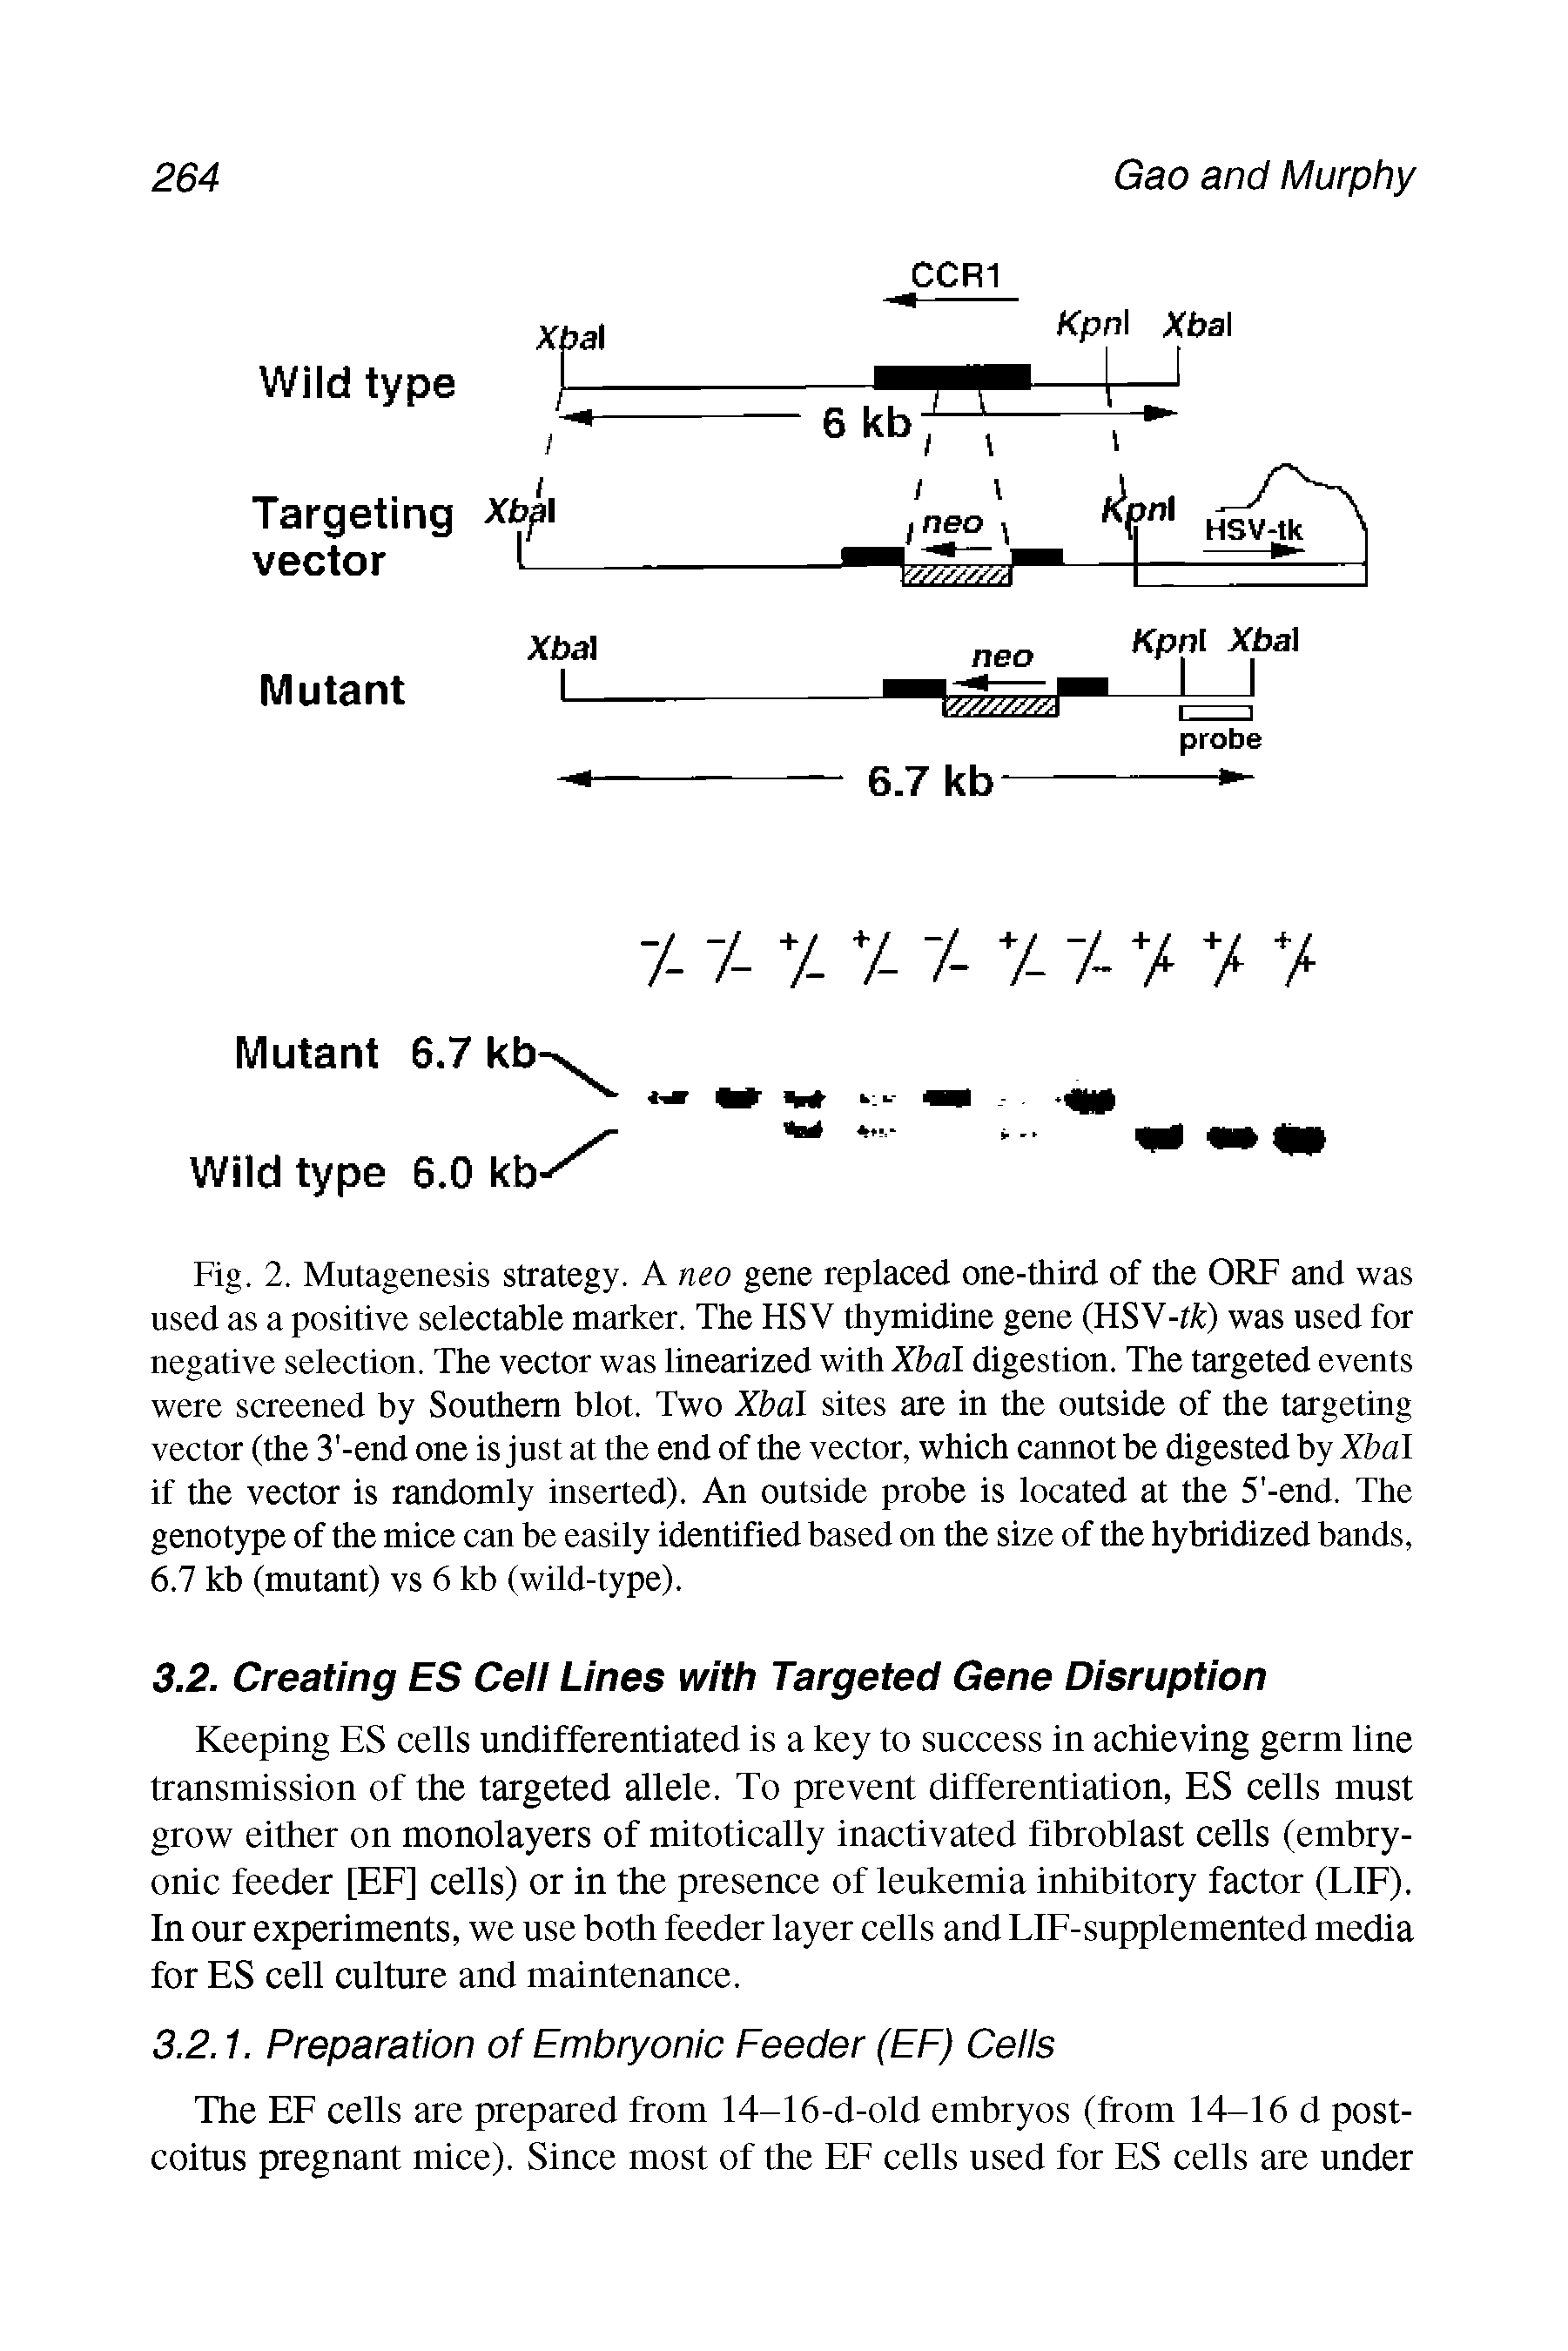 Fig. 2. Mutagenesis strategy. A neo gene replaced one-third of the ORF and was used as a positive selectable marker. The HSV thymidine gene (HSV-ffc) was used for negative selection. The vector was linearized with Xbal digestion. The targeted events were screened by Southern blot. Two Xbal sites are in the outside of the targeting vector (the 3 -end one is just at the end of the vector, which cannot be digested by Xbal if the vector is randomly inserted). An outside probe is located at the 5 -end. The genotype of the mice can be easily identified based on the size of the hybridized bands, 6.7 kb (mutant) vs 6 kb (wild-type).